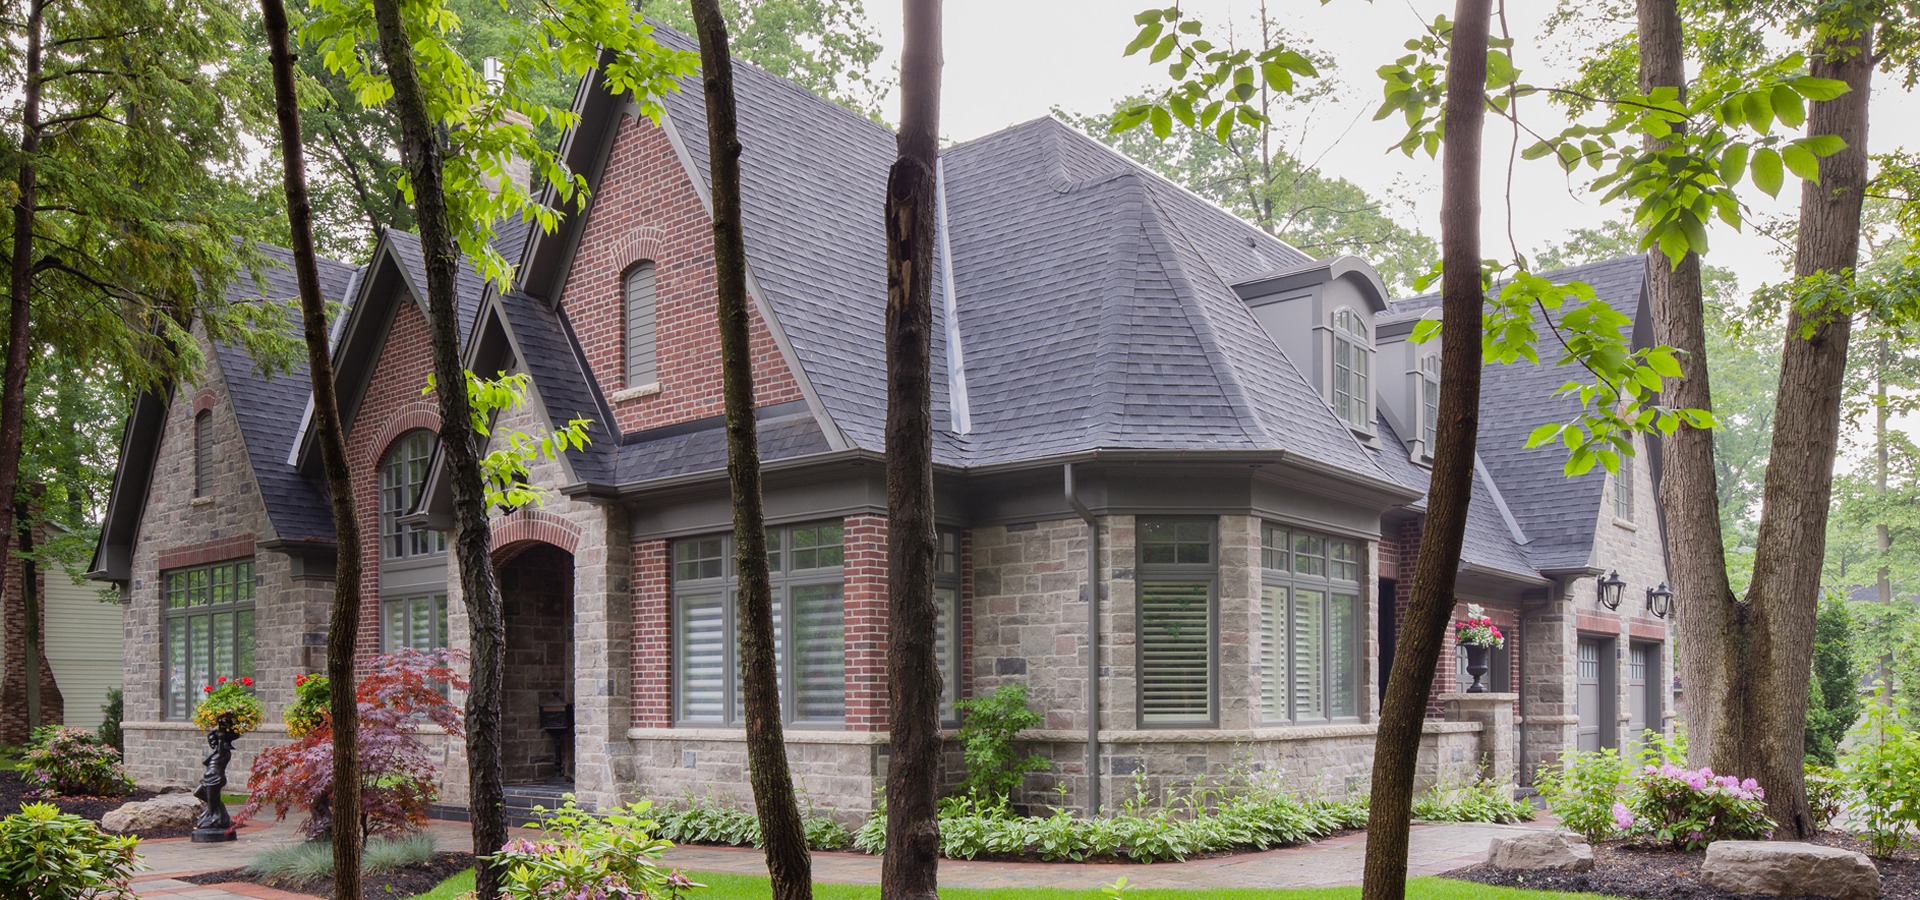 Misissauga house with natural stone, red brick and grey trim.